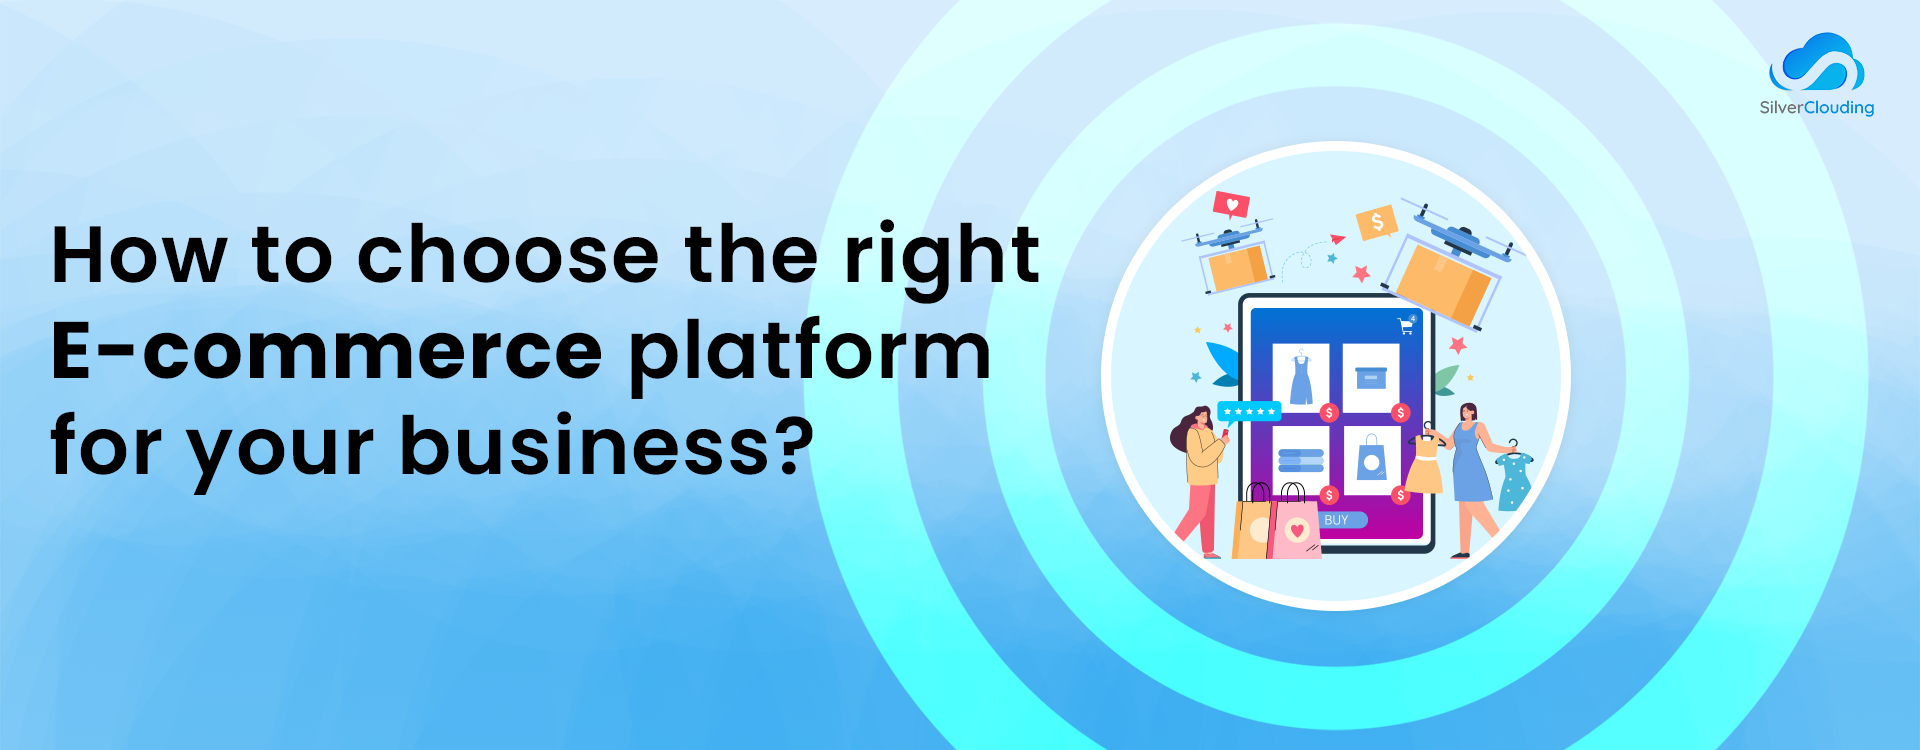 How to Choose the right e-commerce platform for your business?